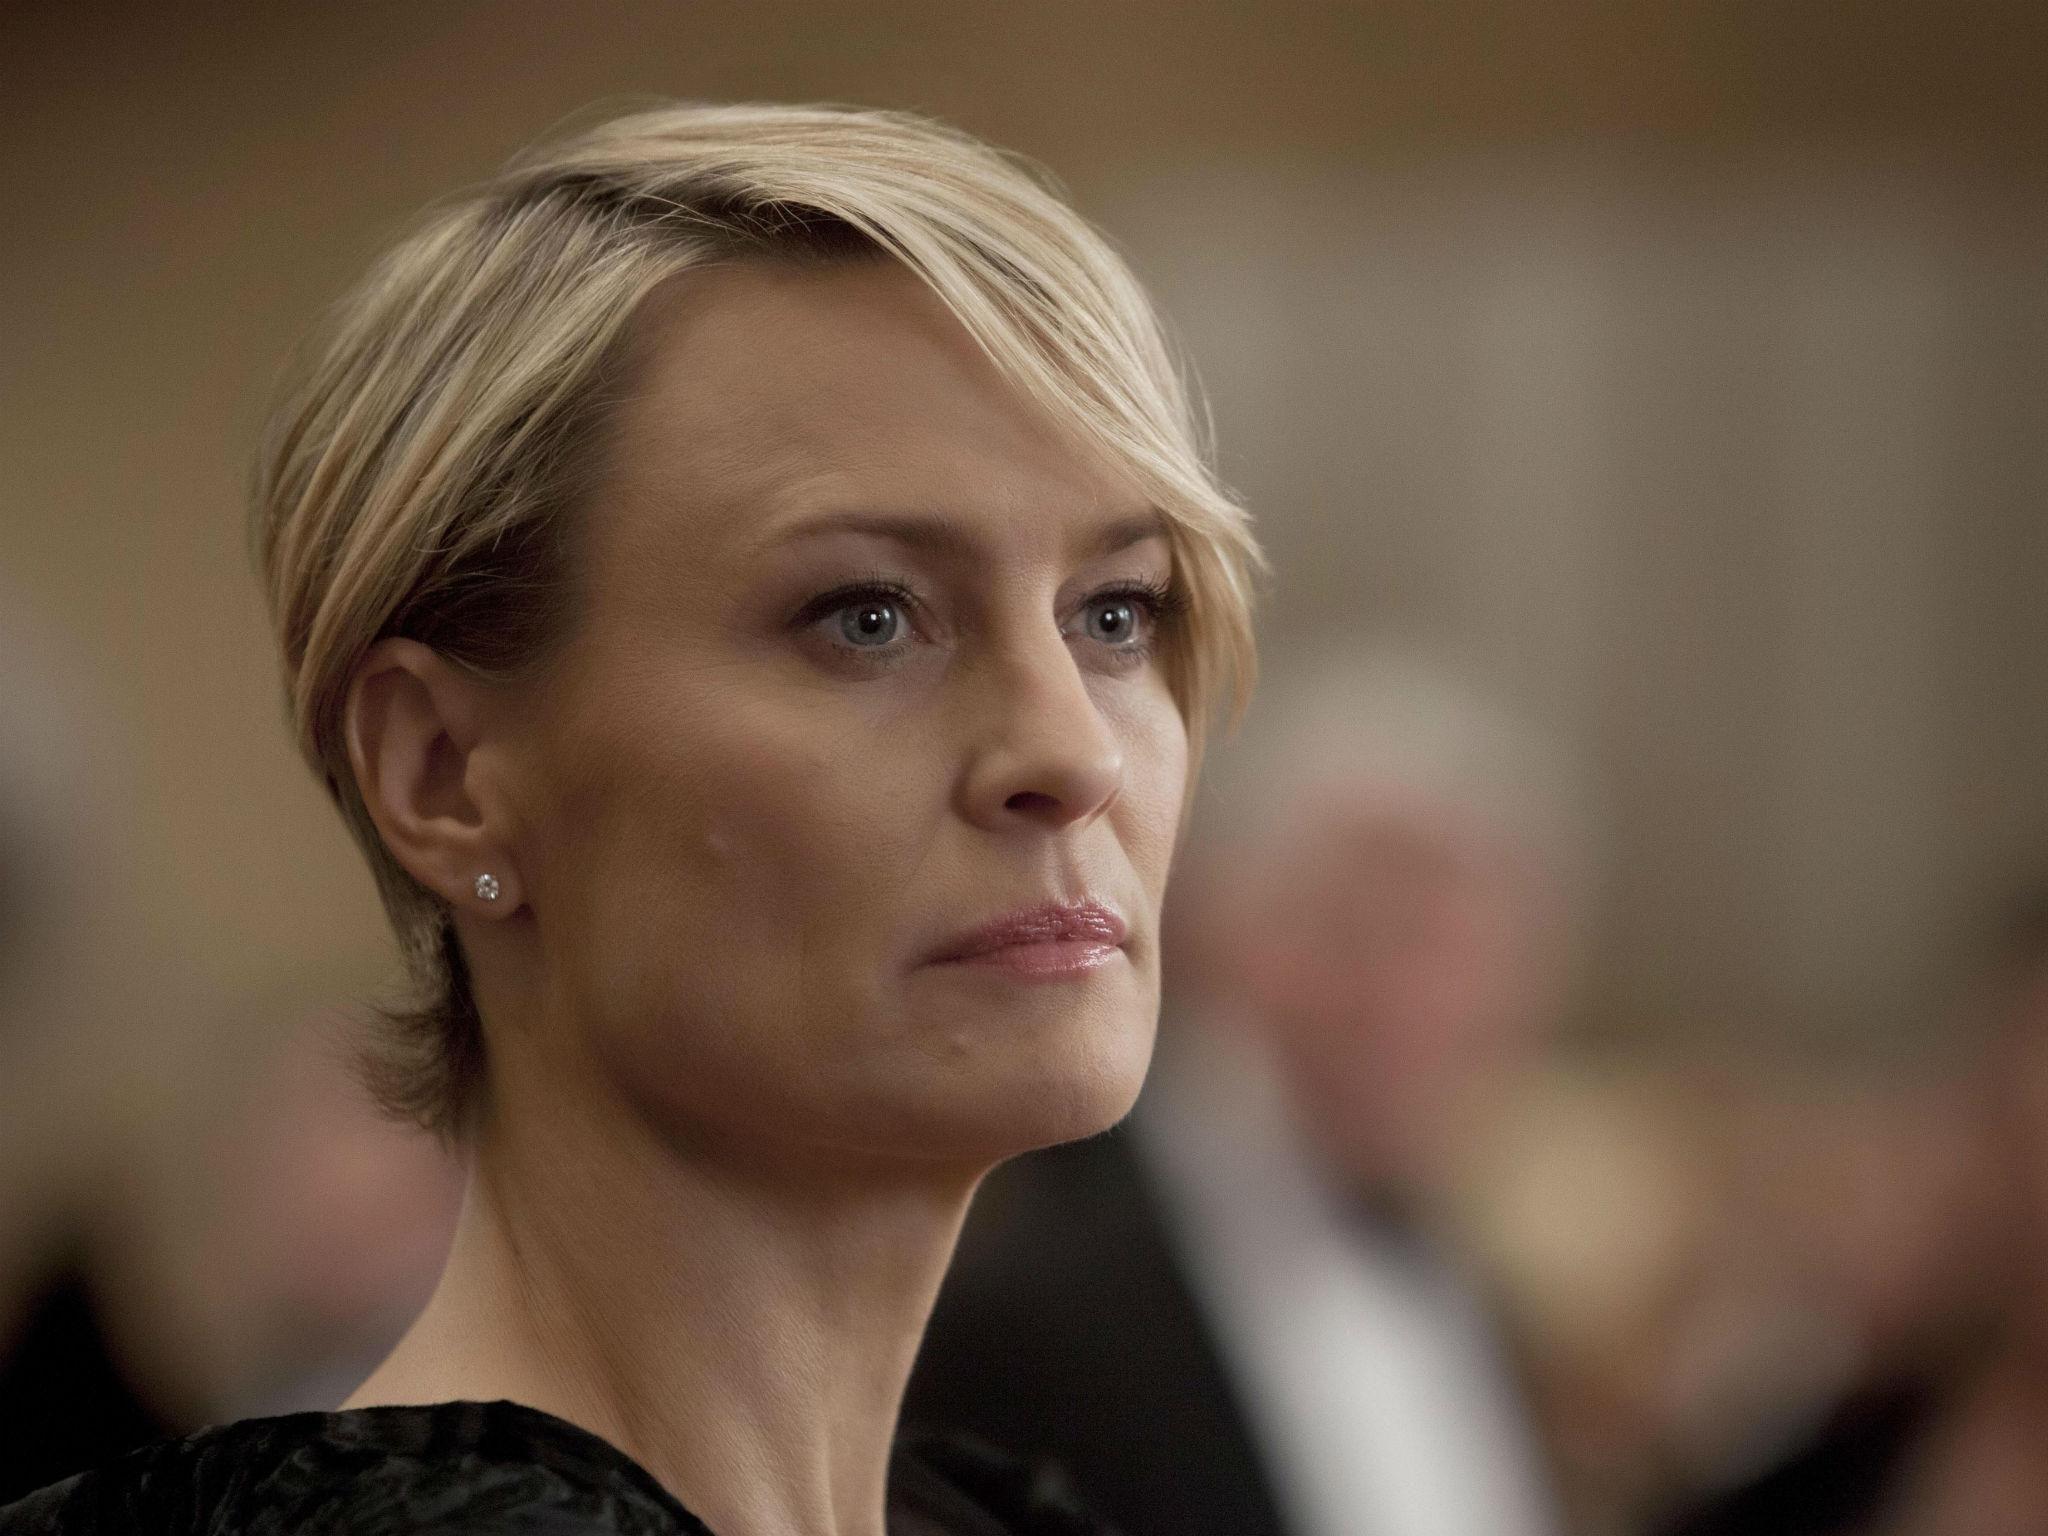 House of Cards season 6 star Robin Wright takes White House centre